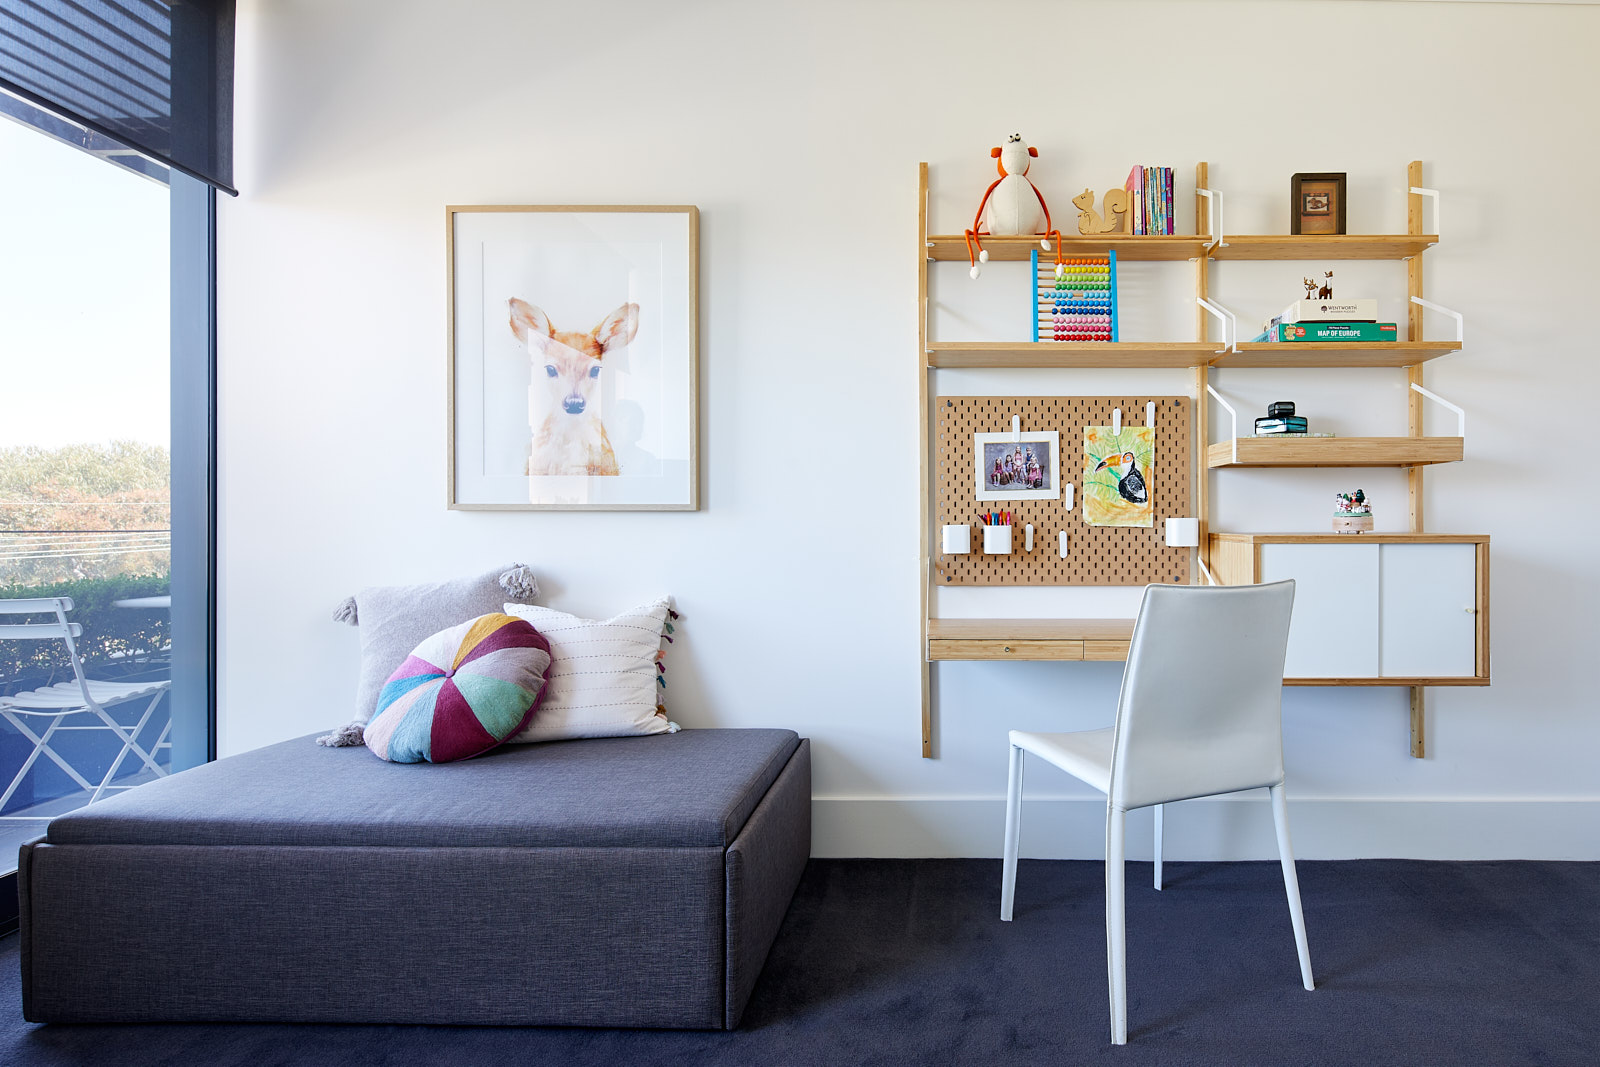 Playroom bookcase -This playroom functions as a spare time guest room and has heaps of room for storage